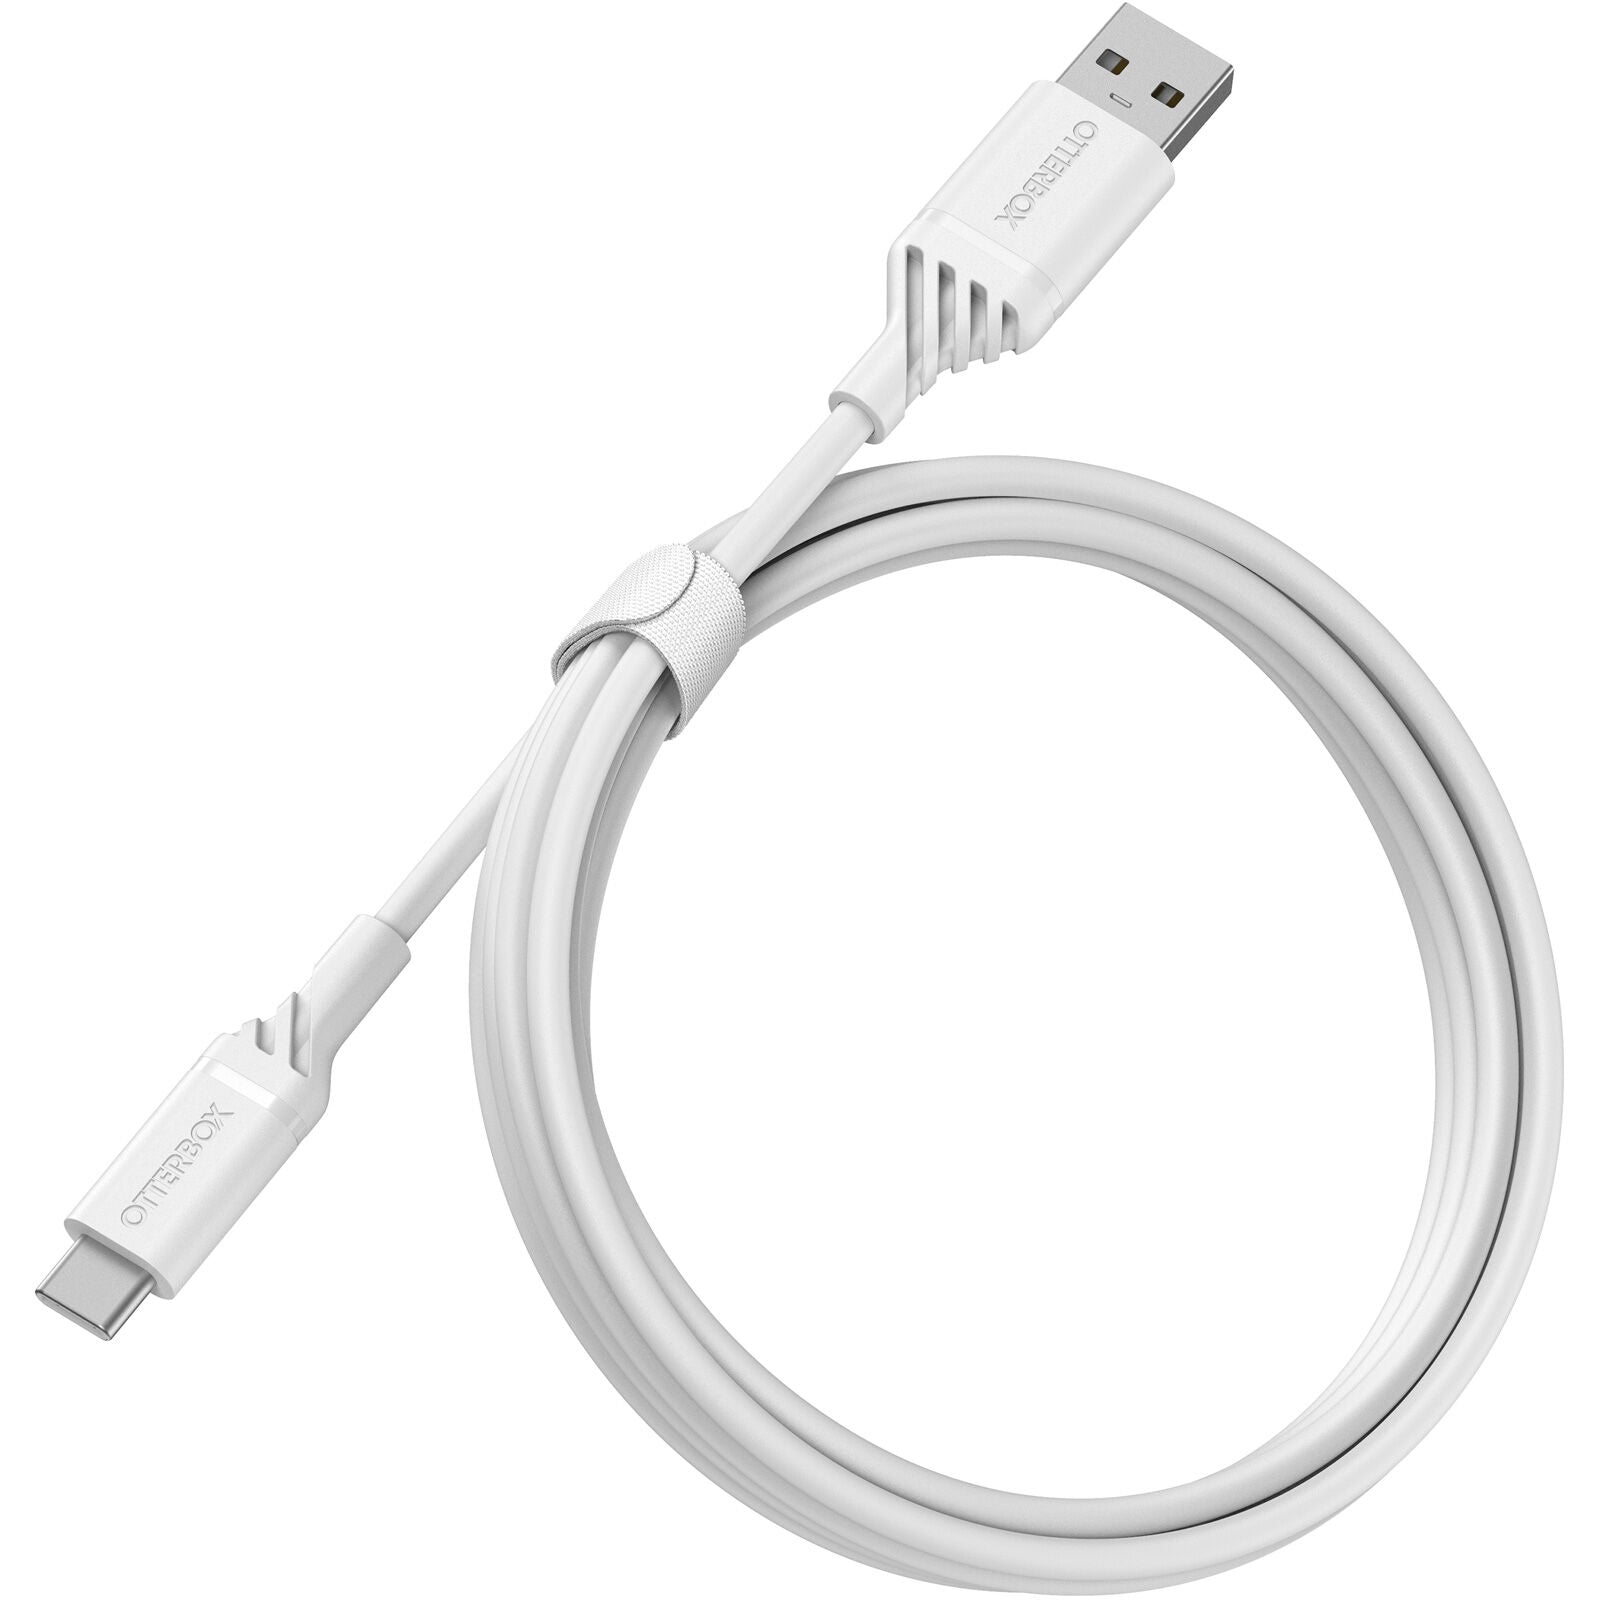 OtterBox USB-C to USB-A Cable (1M) - White (78-52536), USB 2.0, 3 AMPS (60W),Bend/Flex-Tested 3K Times, Durable & Flexible, 480 Mbps Transfer Rate